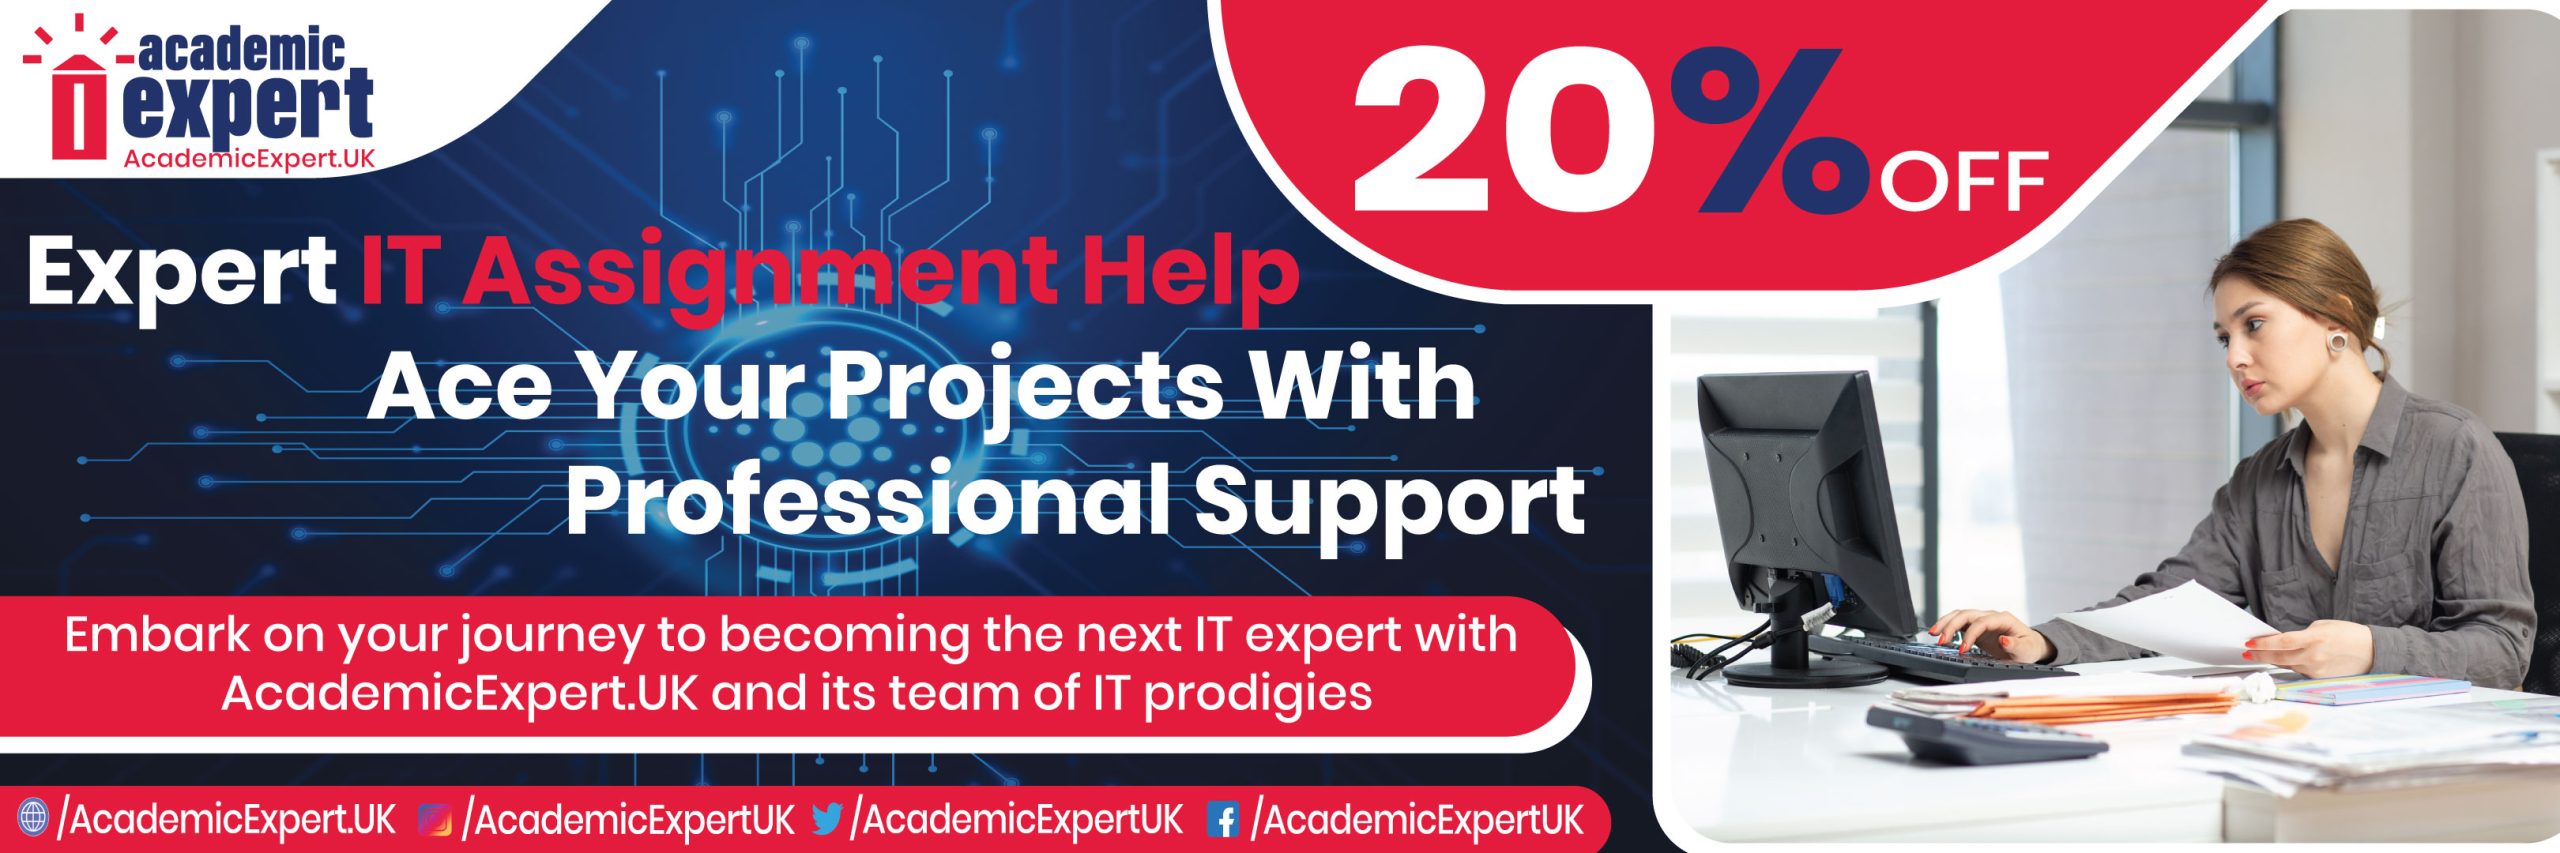 Expert IT Assignment Help Ace Your Projects With Professional Support